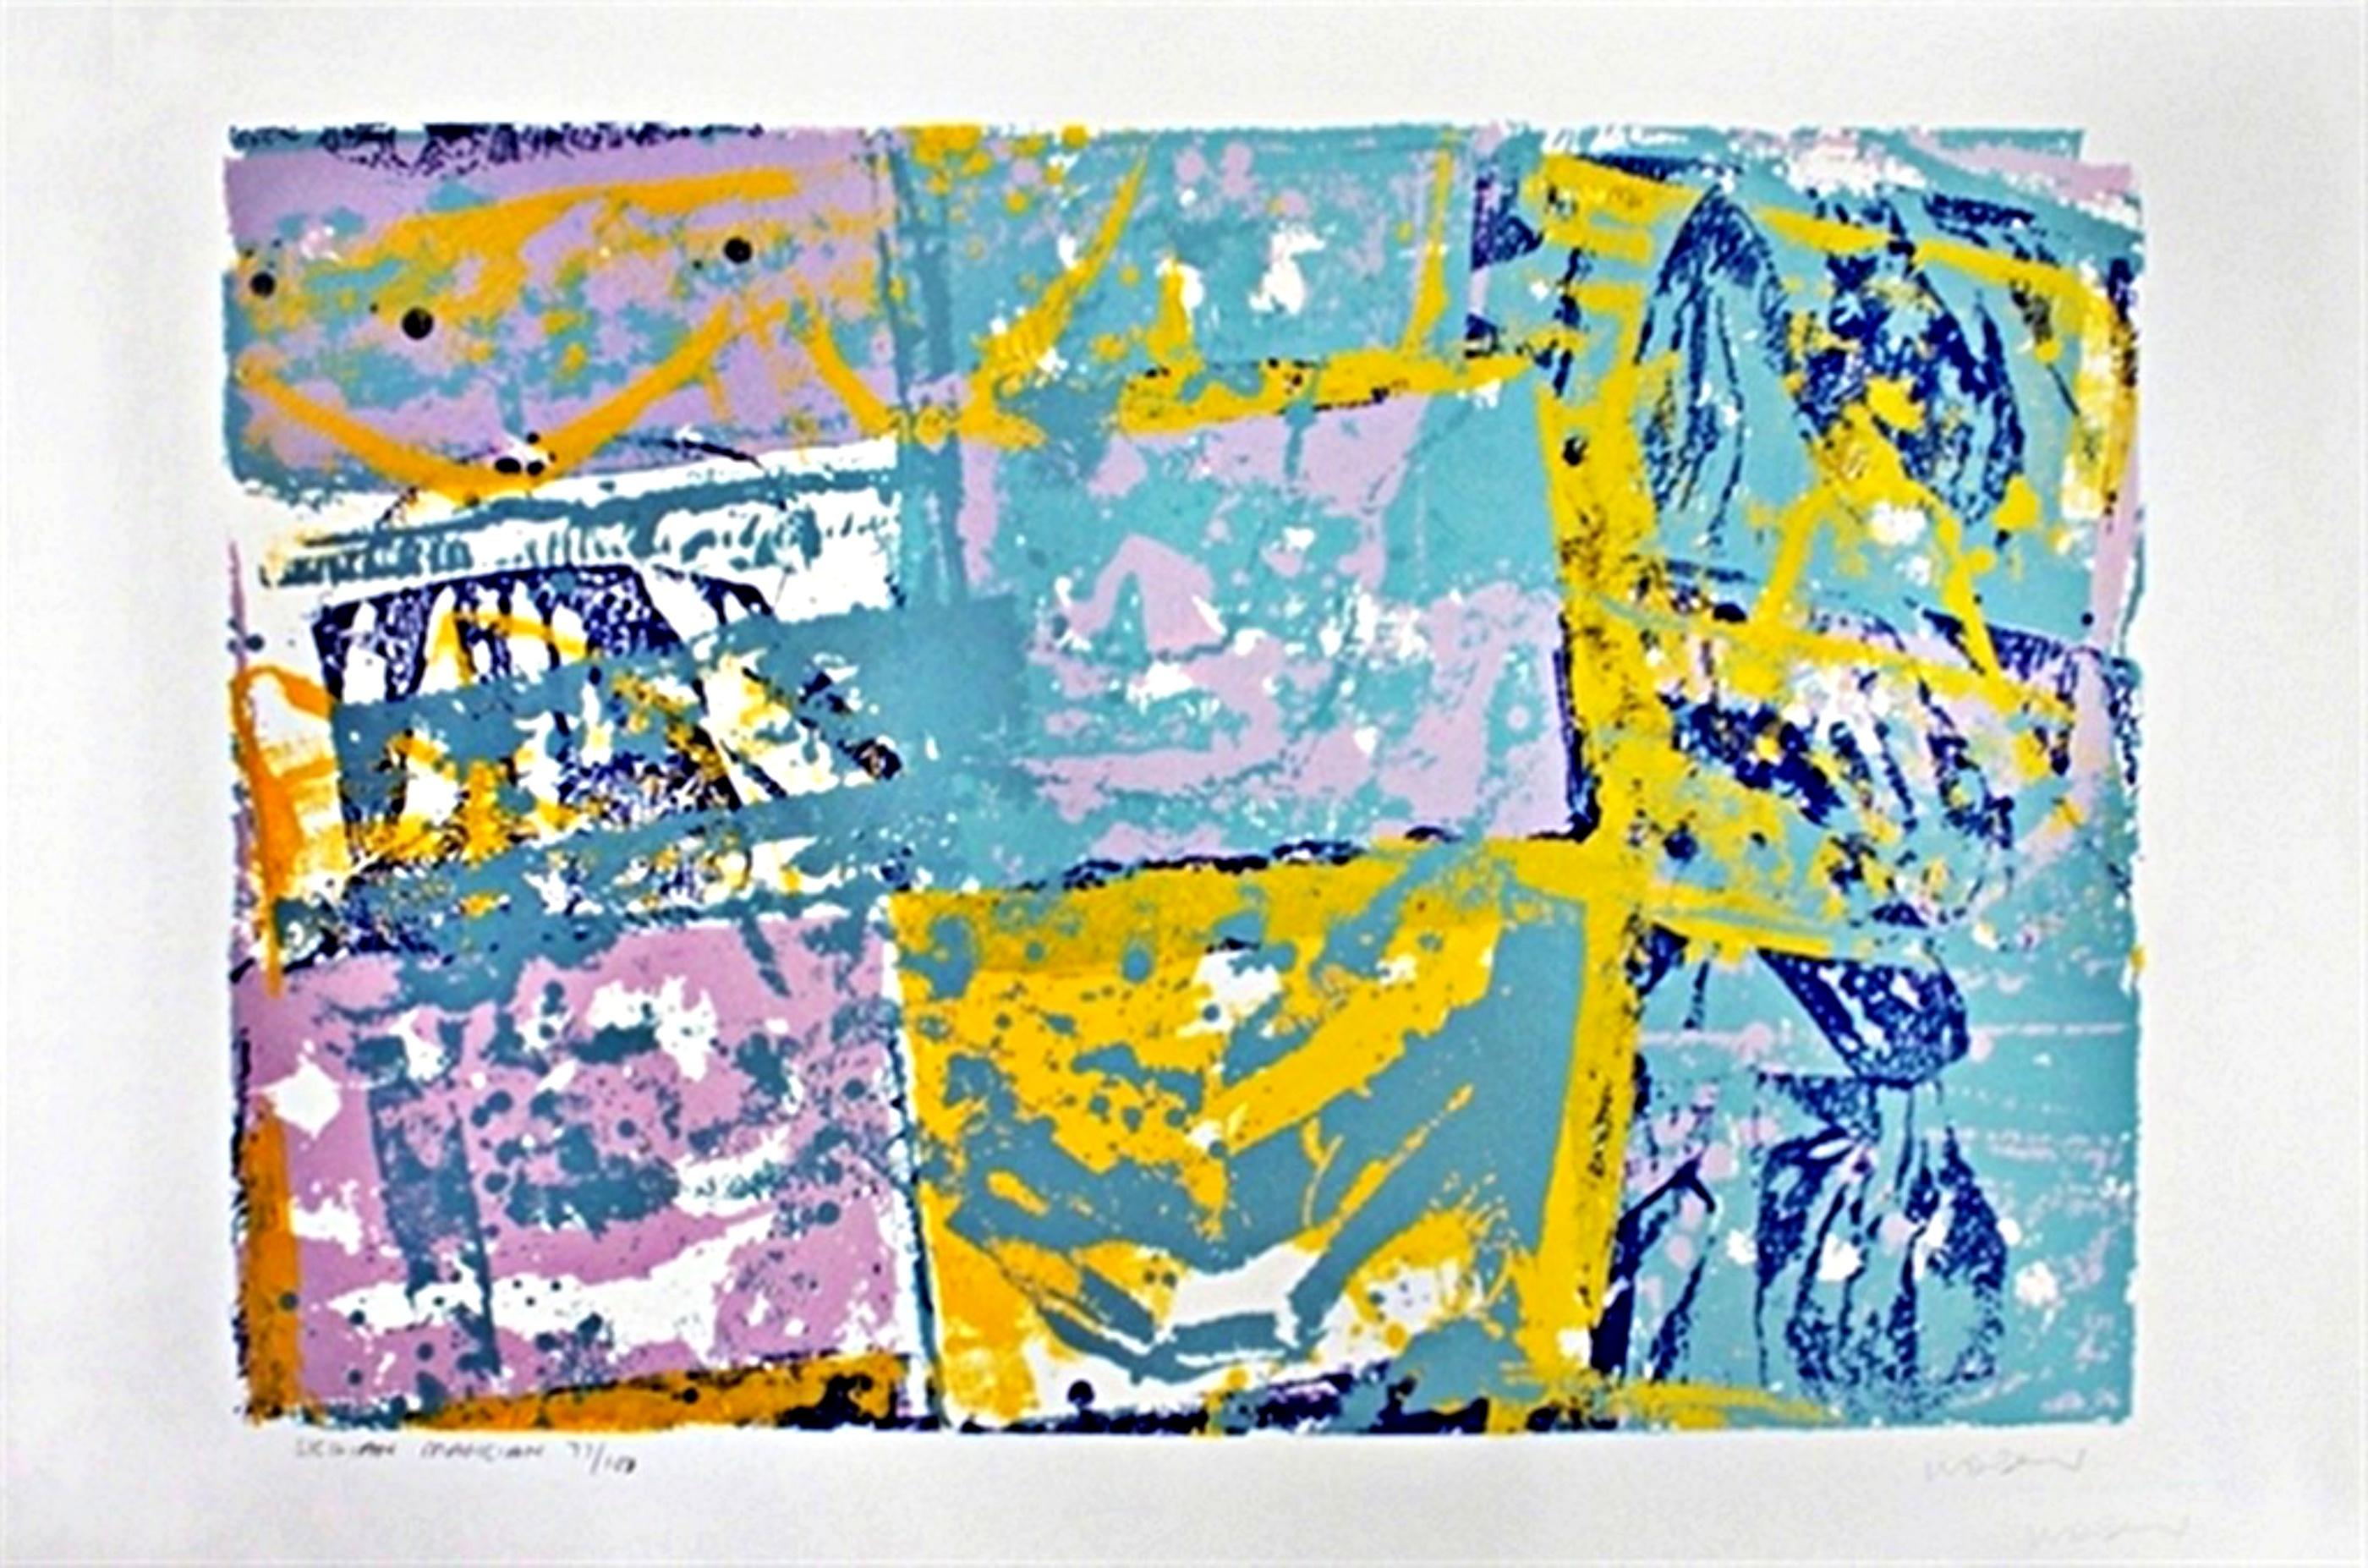 Walter Darby Bannard Abstract Print - Sicilian Magician - lt ed silkscreen by renowned abstract expressionist painter